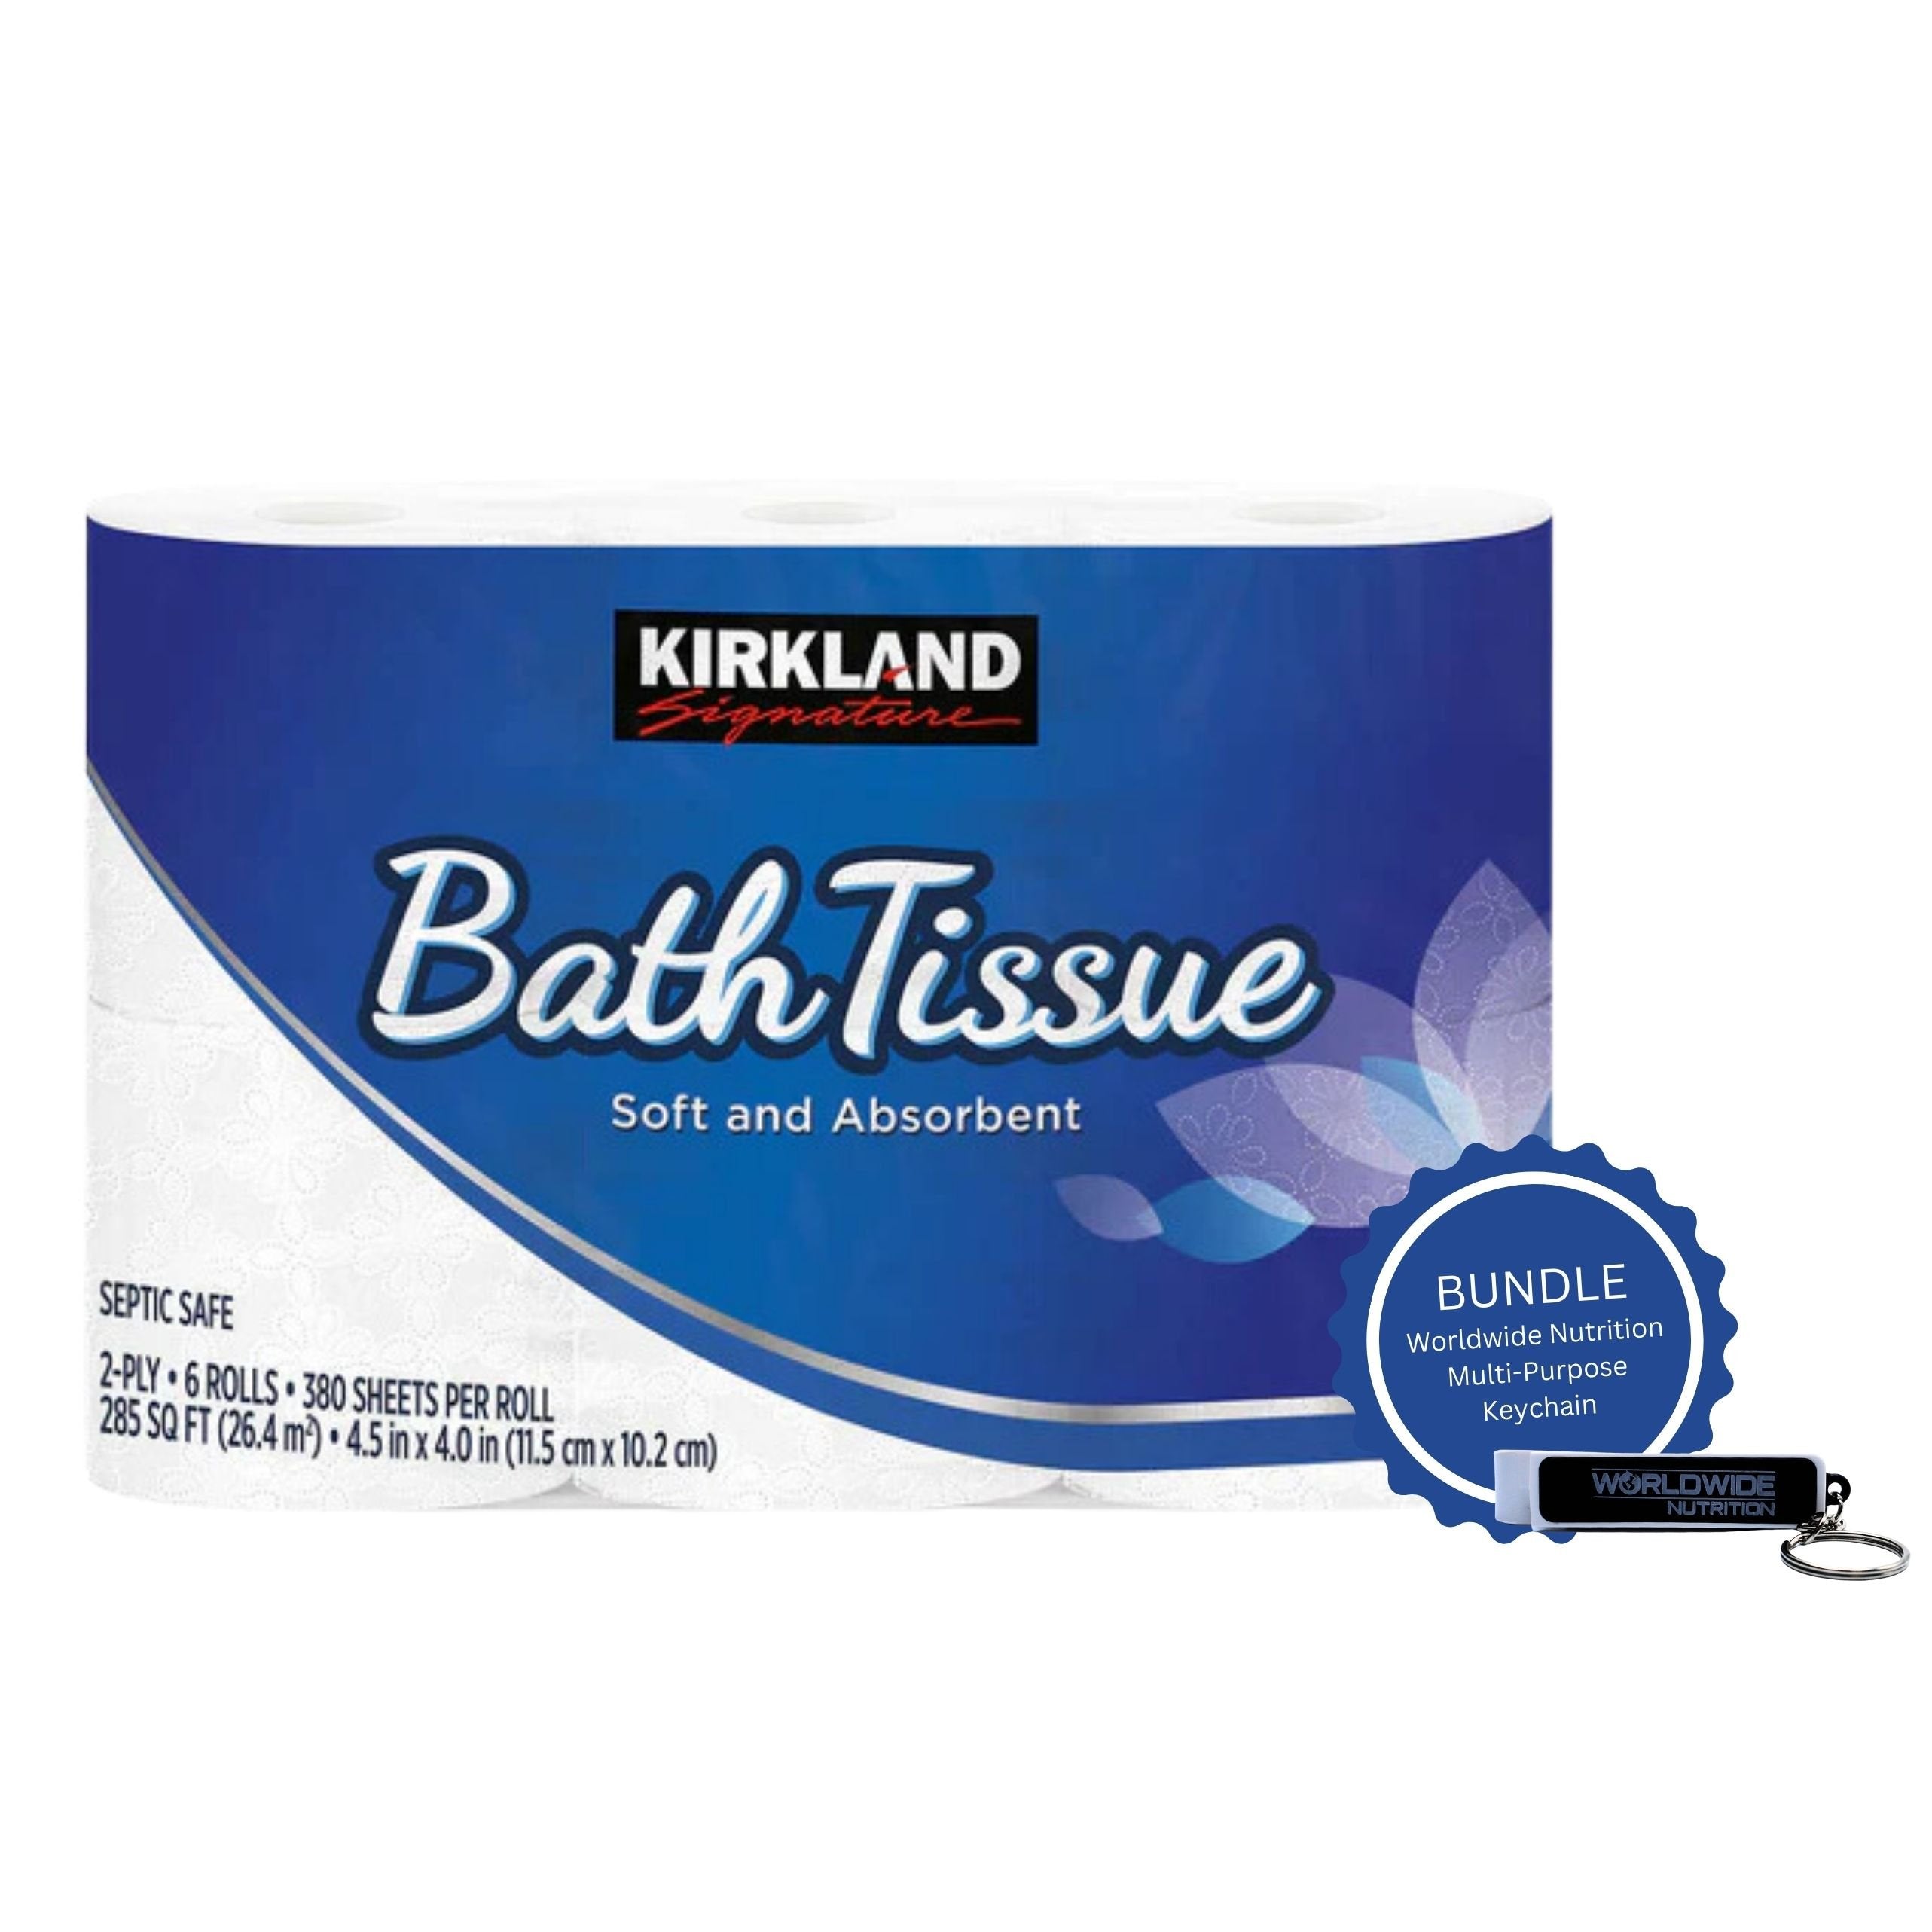 Kirkland Signature 2-Ply Bath Tissue - Soft and Absorbent Toilet Paper - Septic Safe - 6 Rolls - Pack of 1 with Multi-Purpose Keychain